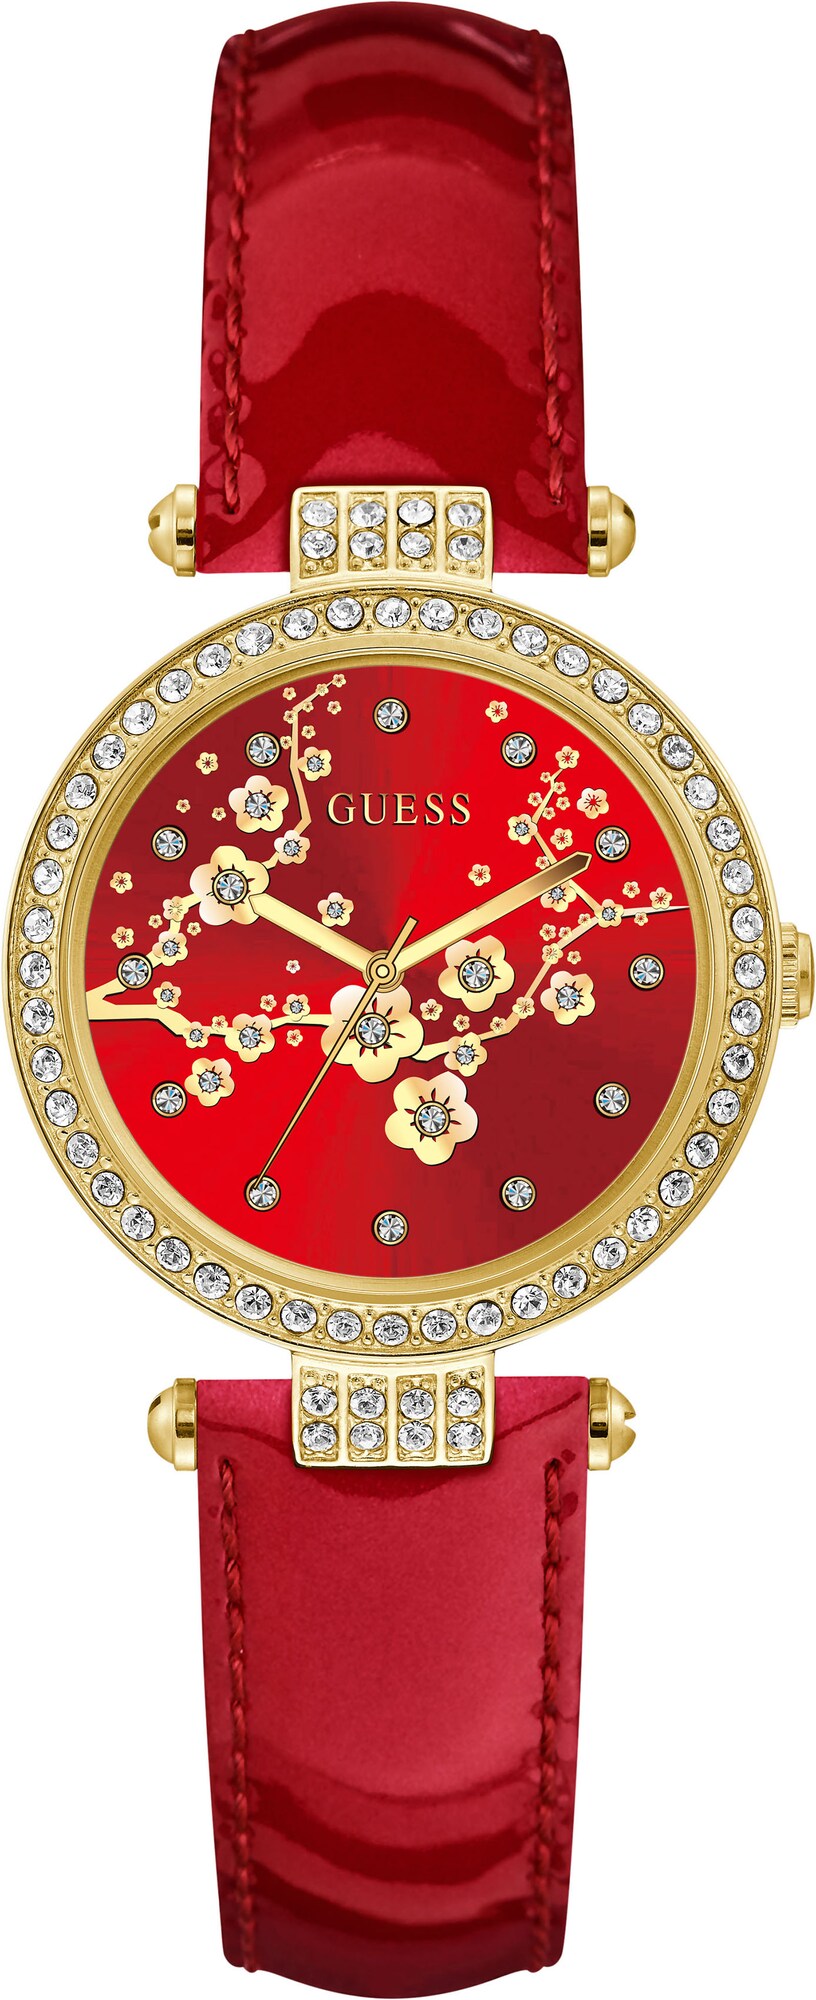 GUESS Uhr rot / gold